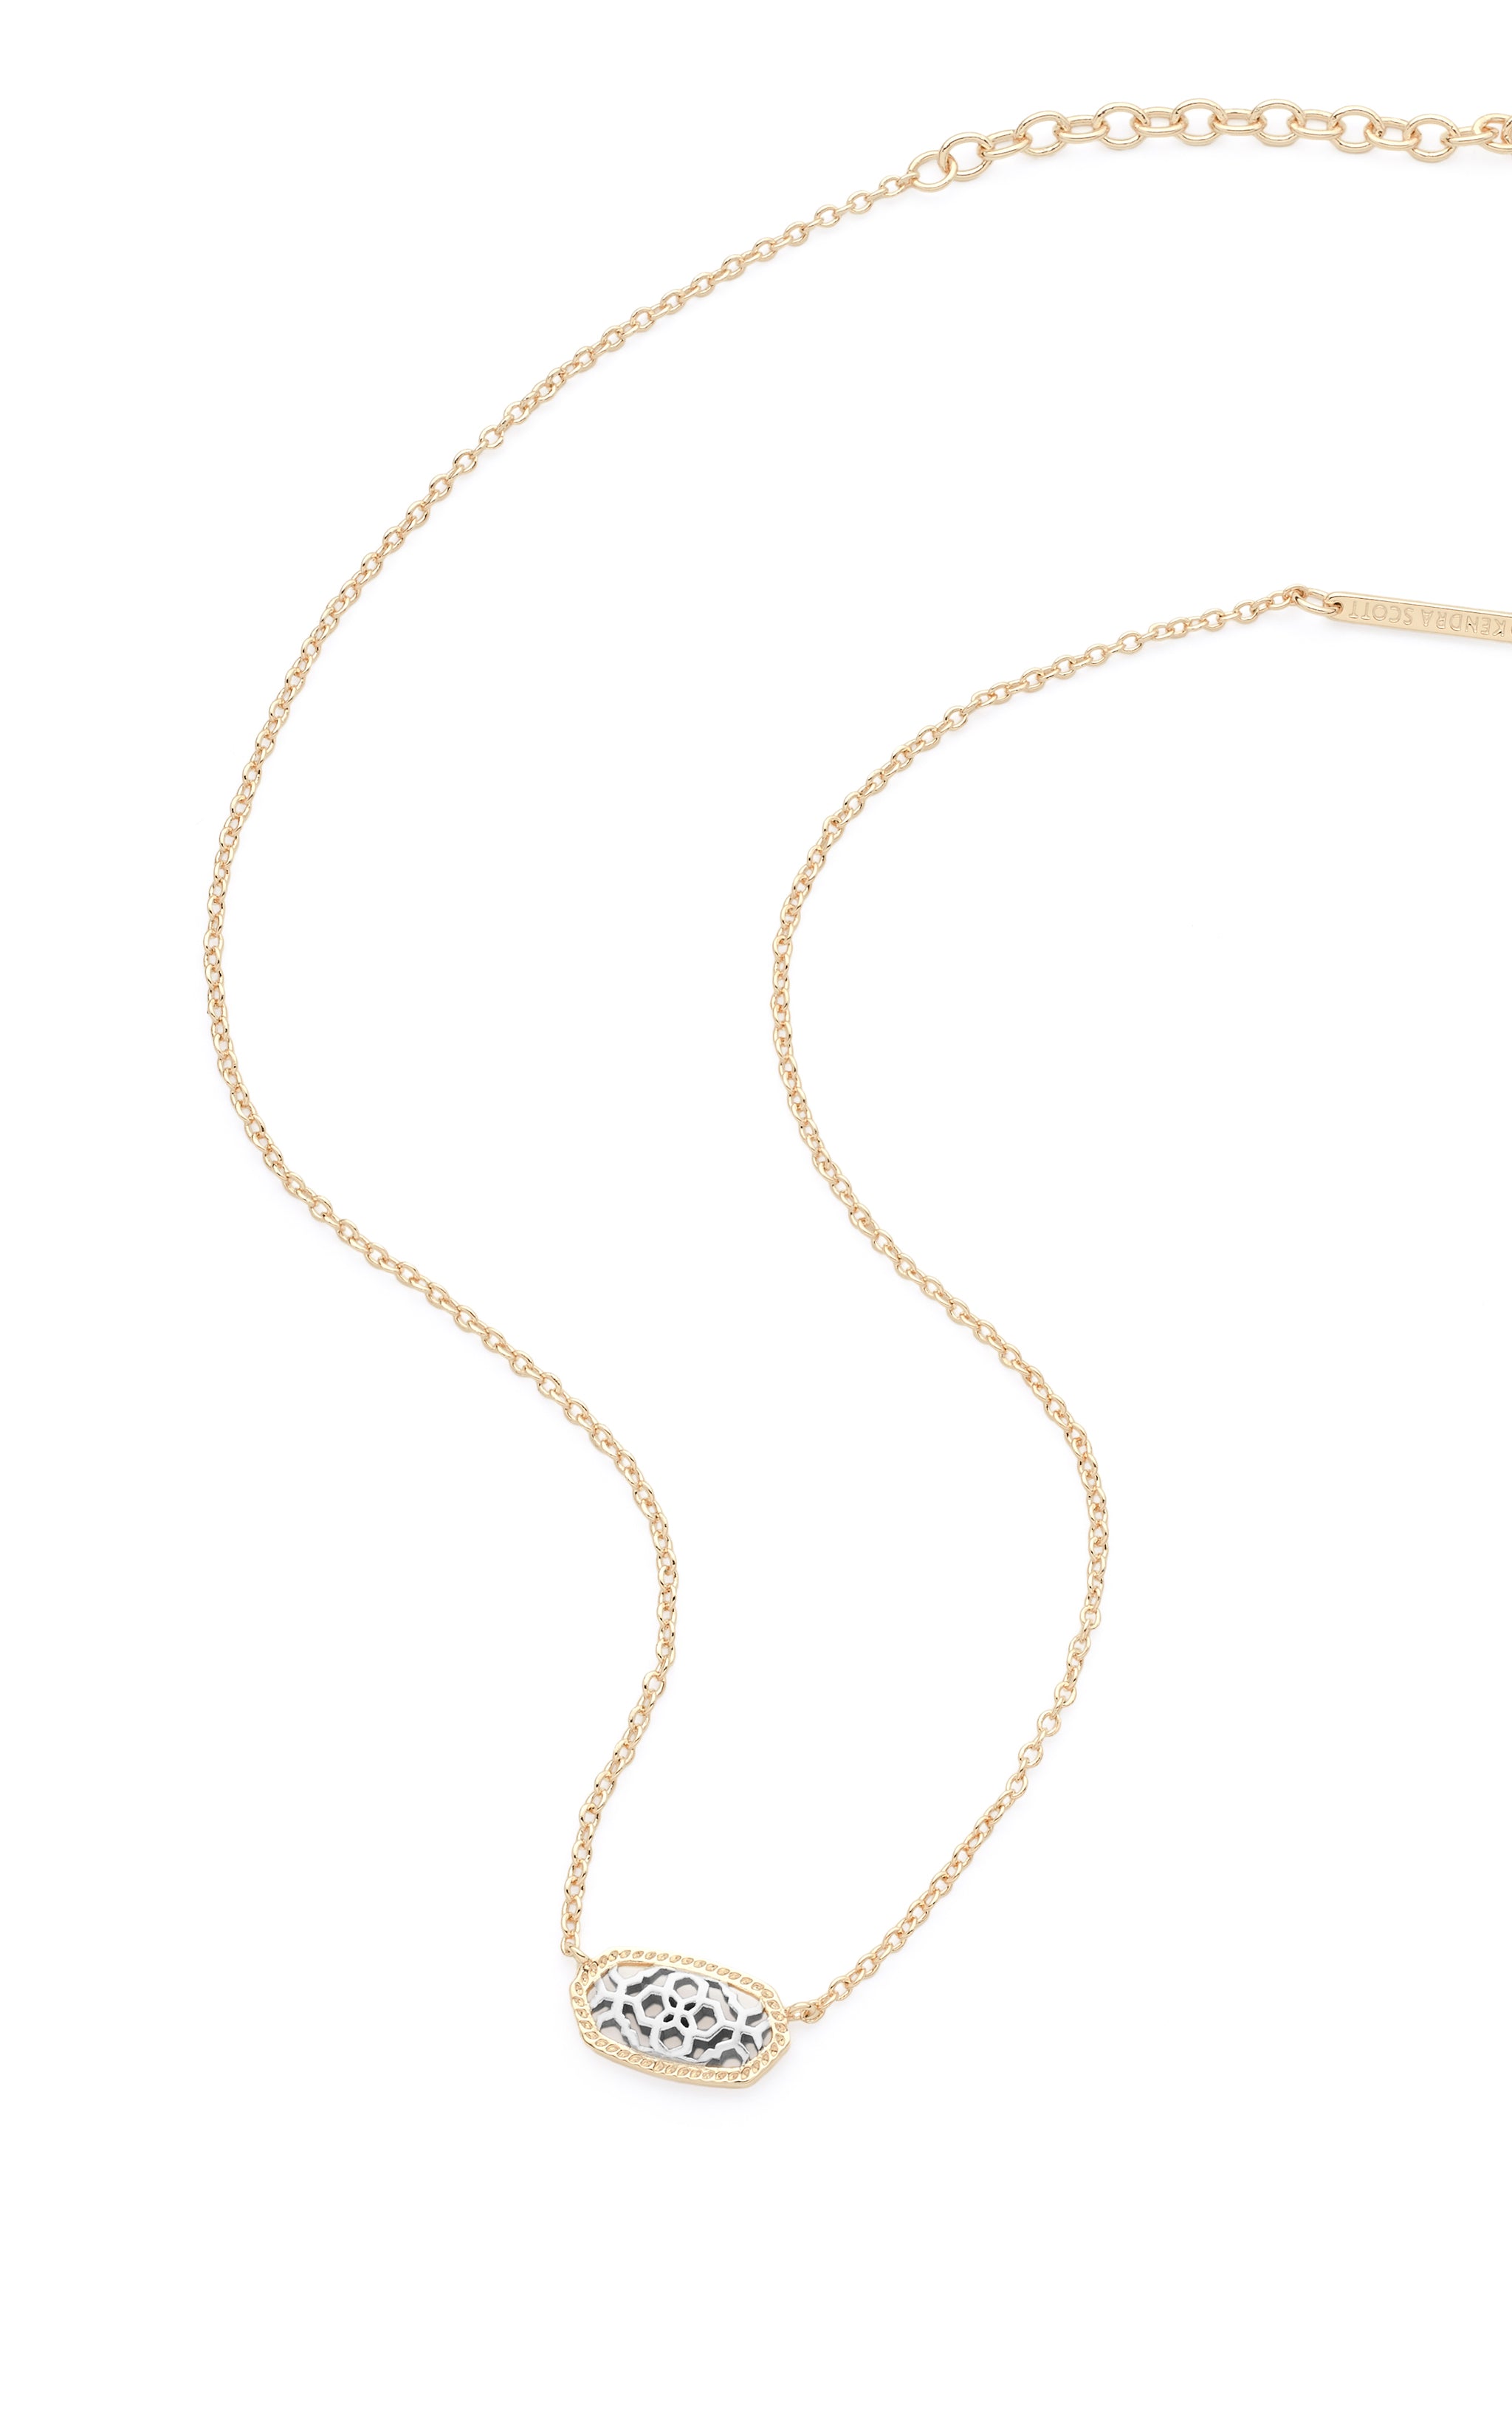 Kendra Scott Elisa Oval Filigree Pendant Necklace in Gold and Rhodium